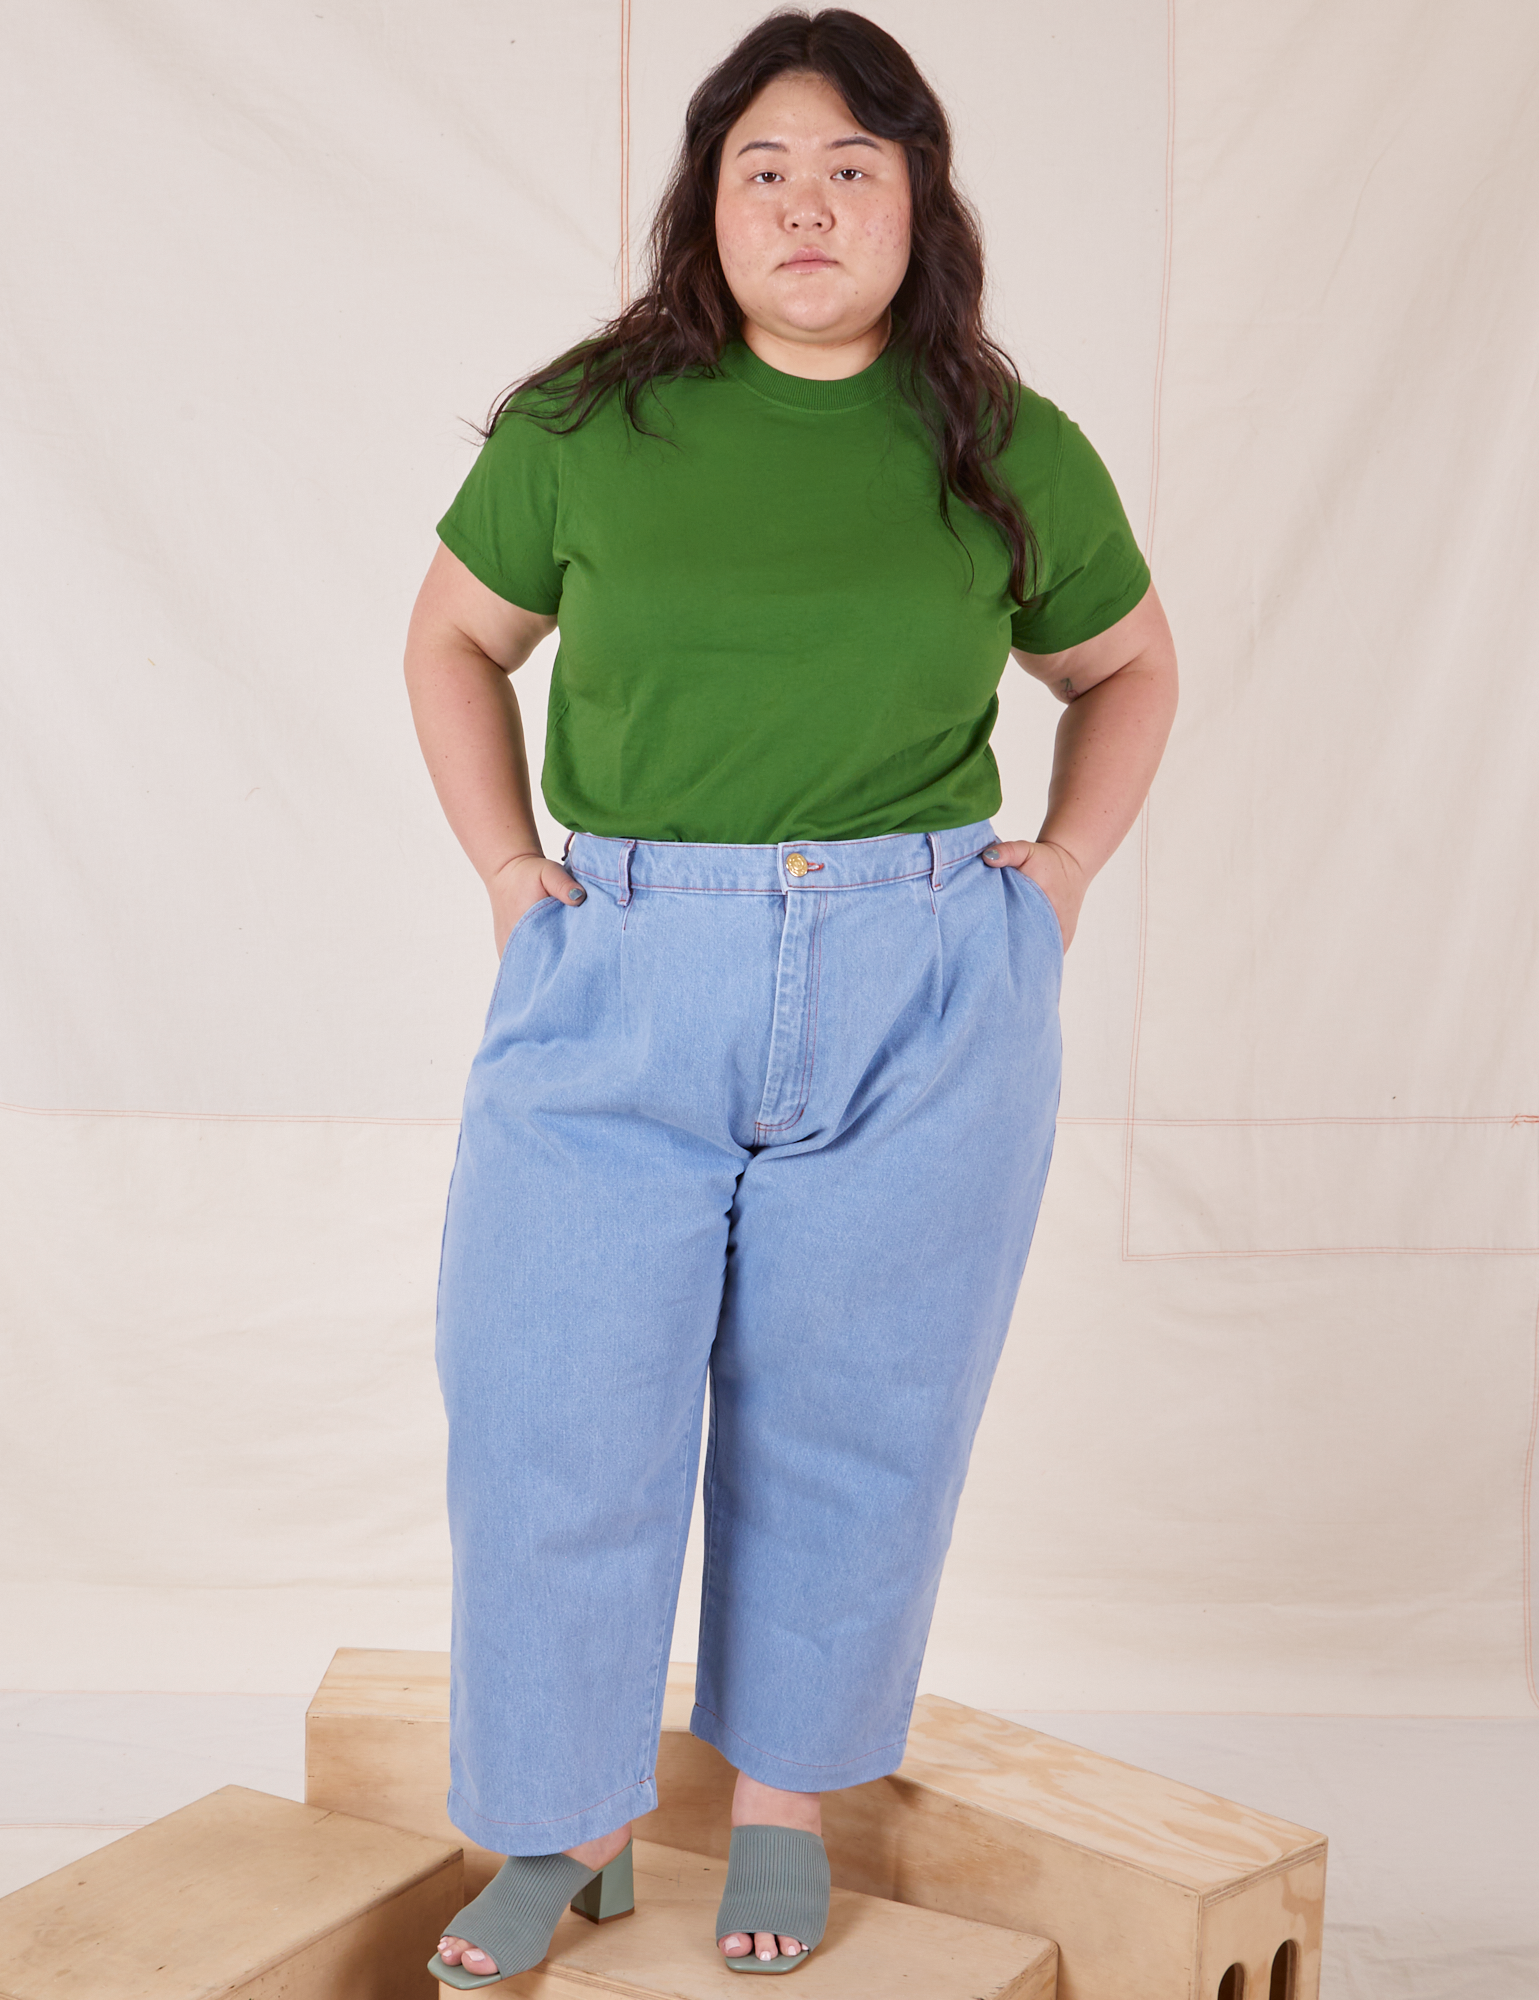 Ashley is wearing Organic Vintage Tee in Lawn Green and light wash Trouser Jeans